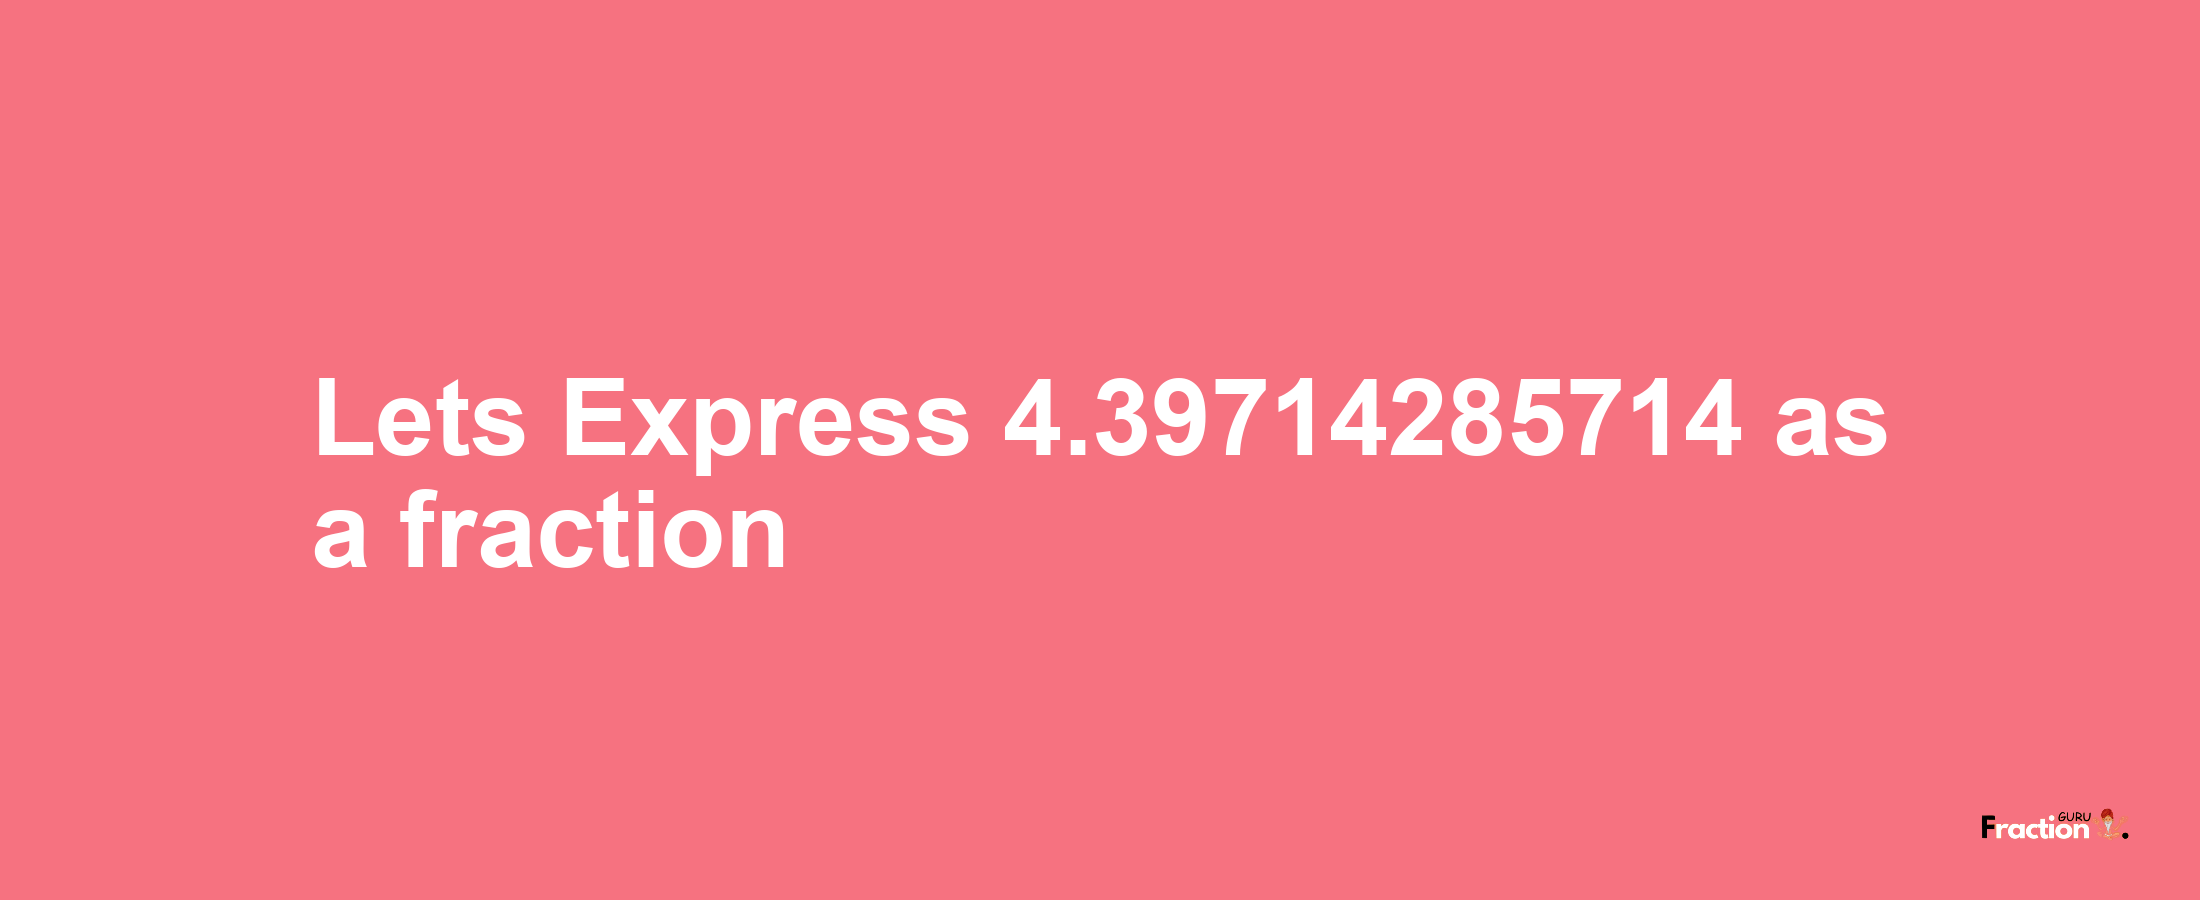 Lets Express 4.39714285714 as afraction